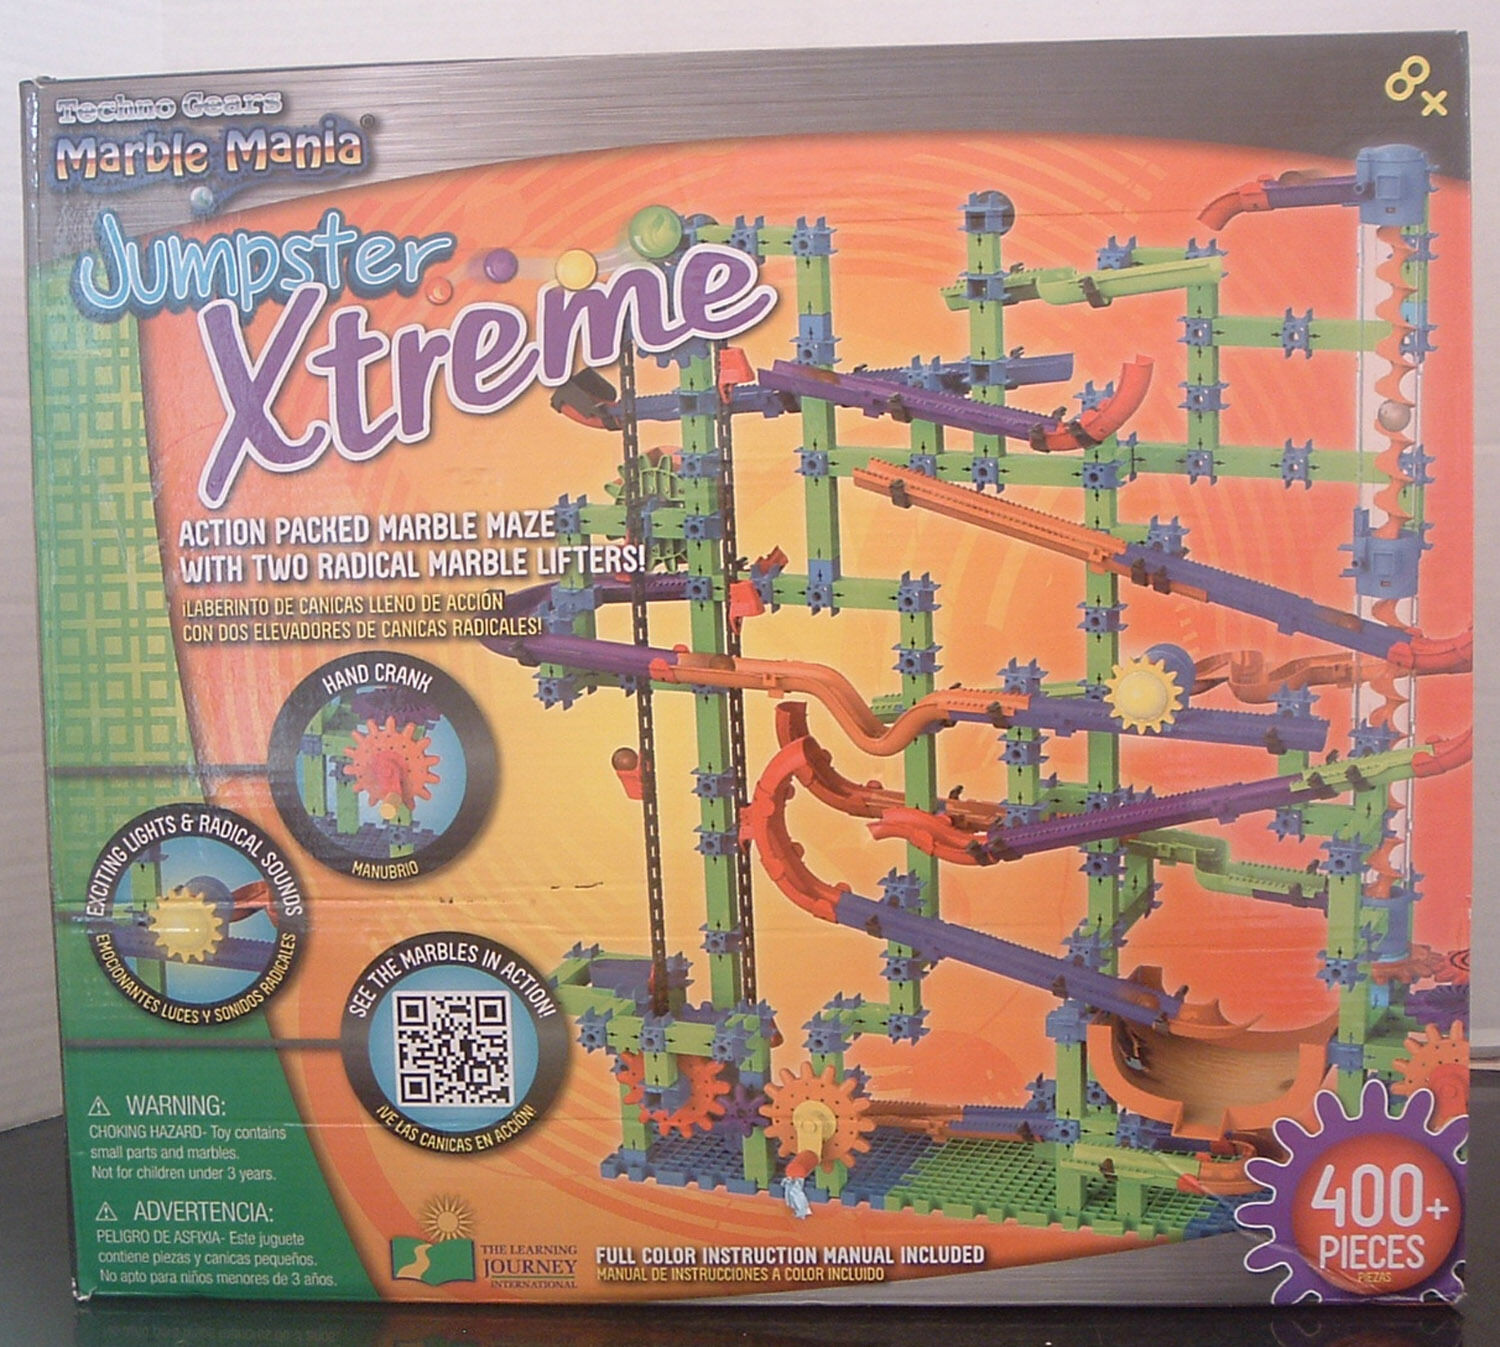 Jumpster Extreme Techno Gears Marble Mania Run Learning Journey 650+ pcs